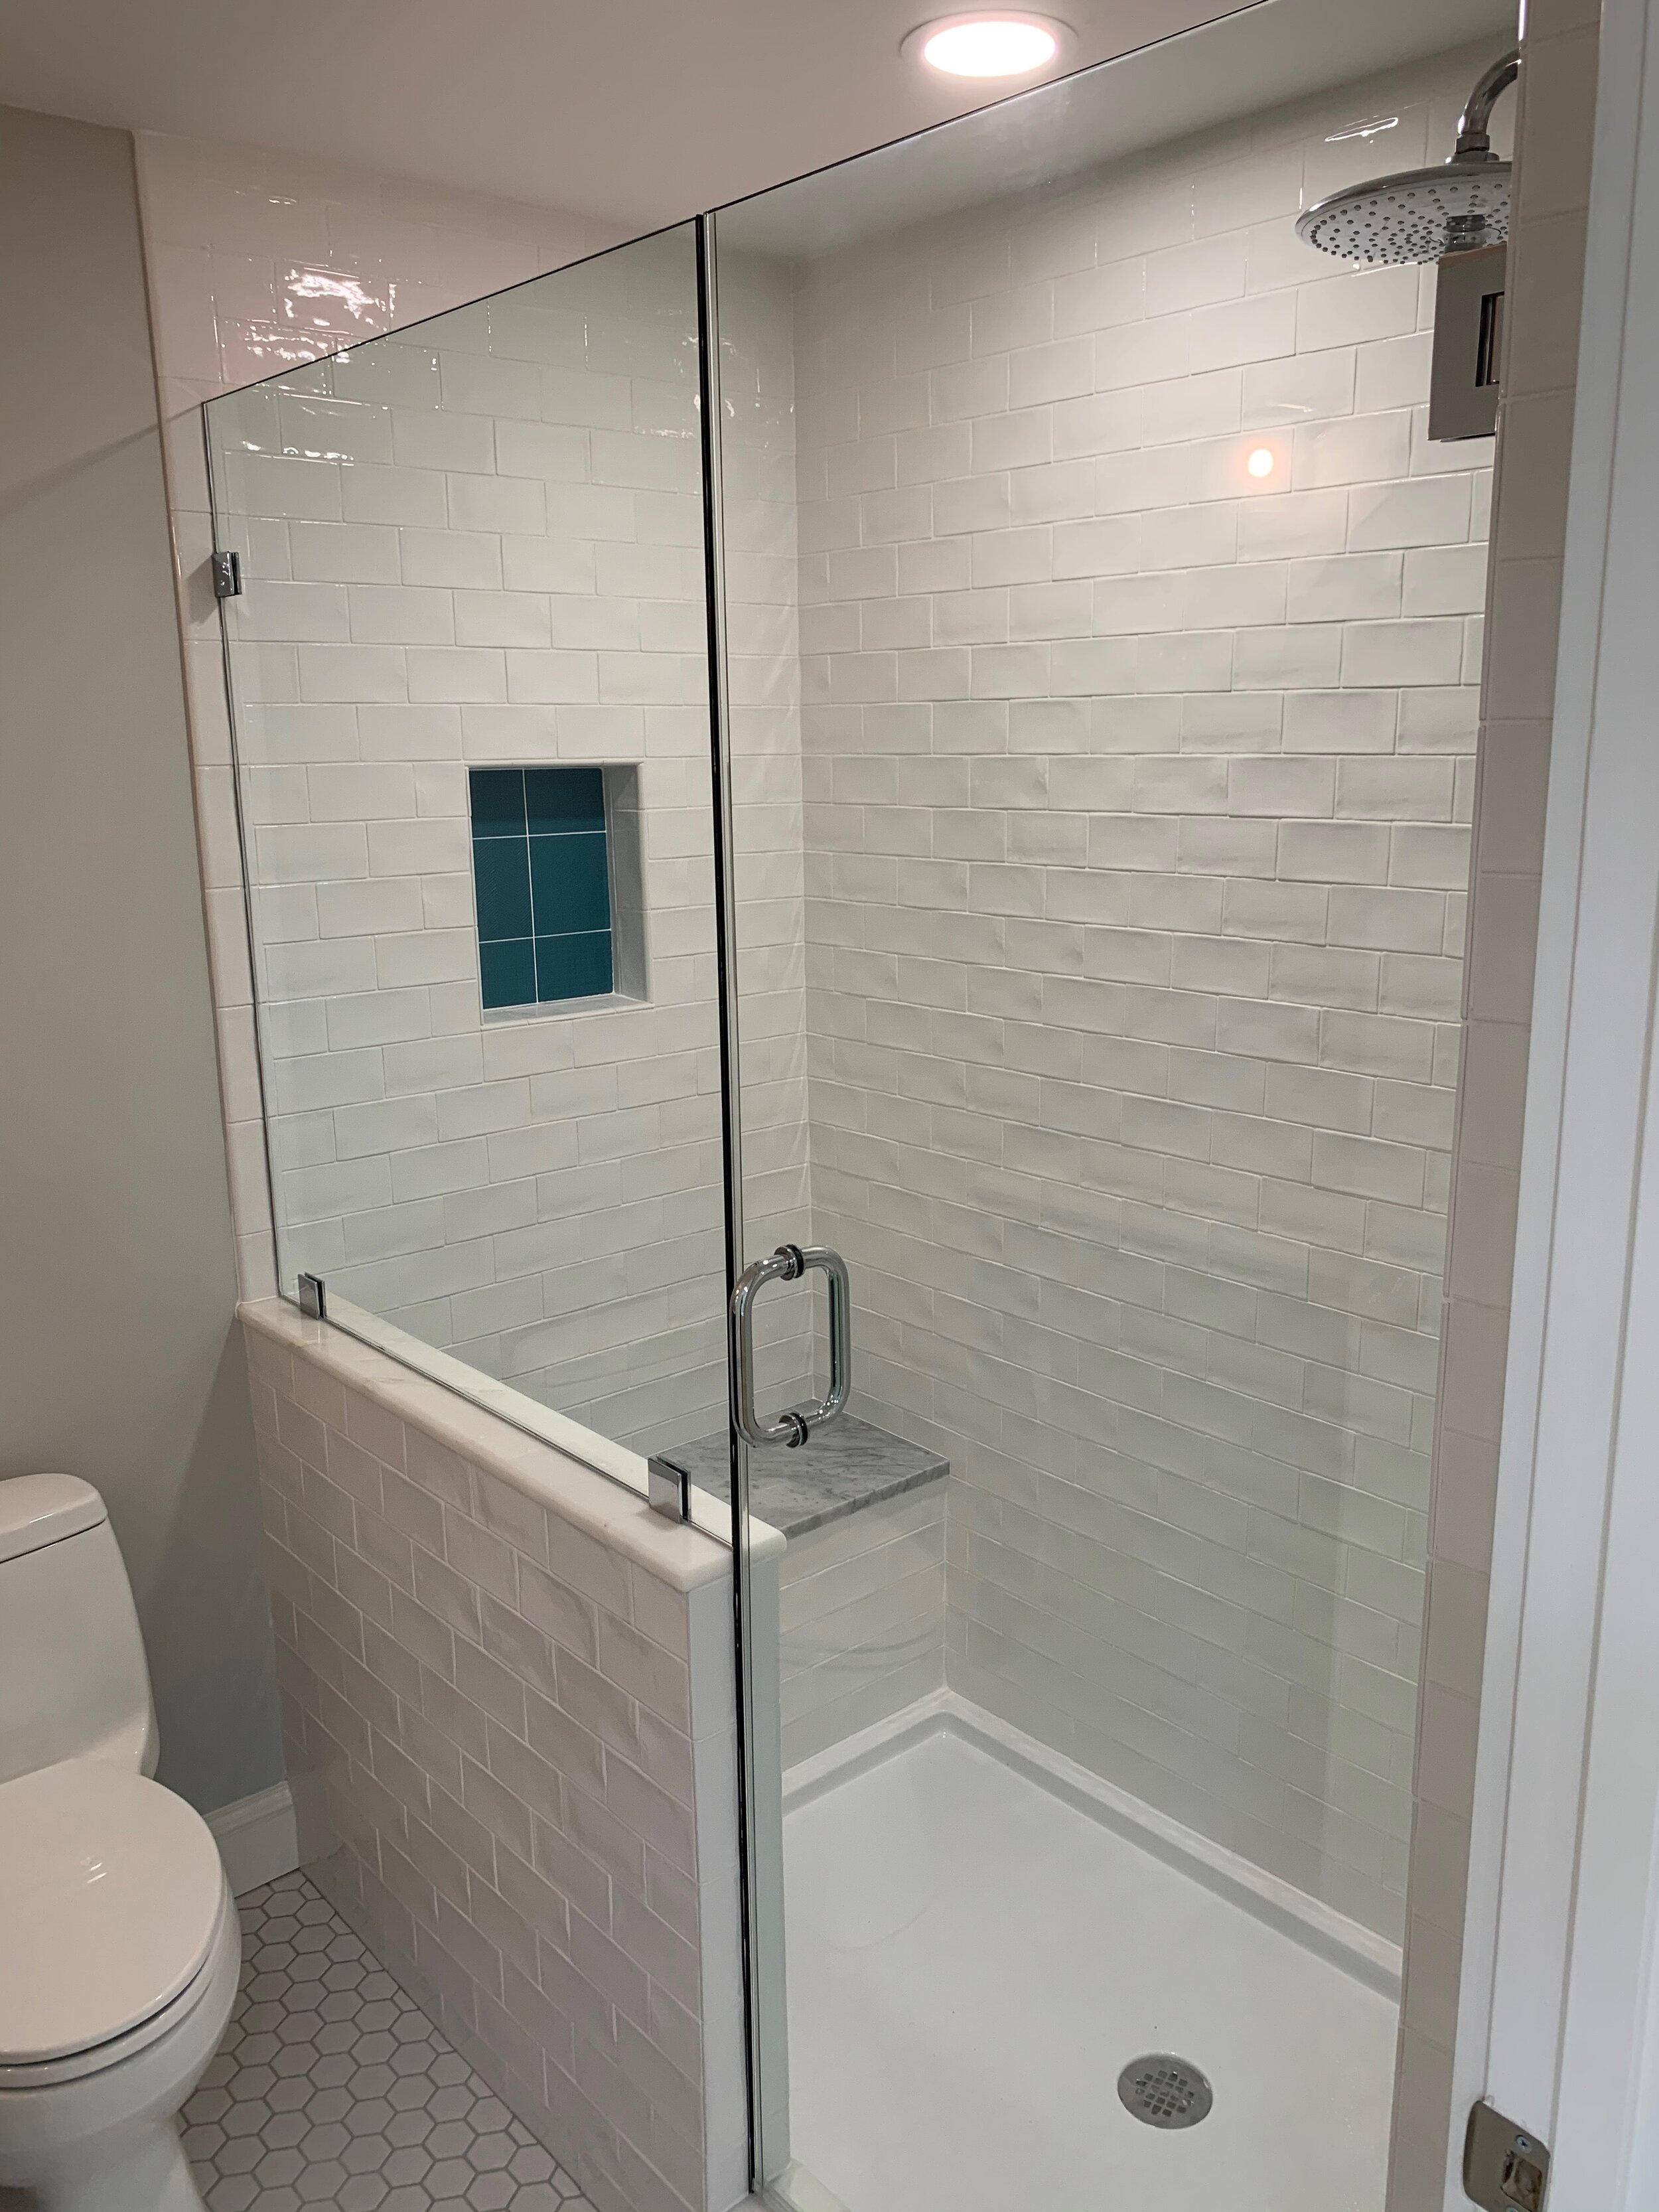  Full Bathroom Remodel:  New Plumbing, Glass Shower, and Wall and Floor Tiles 